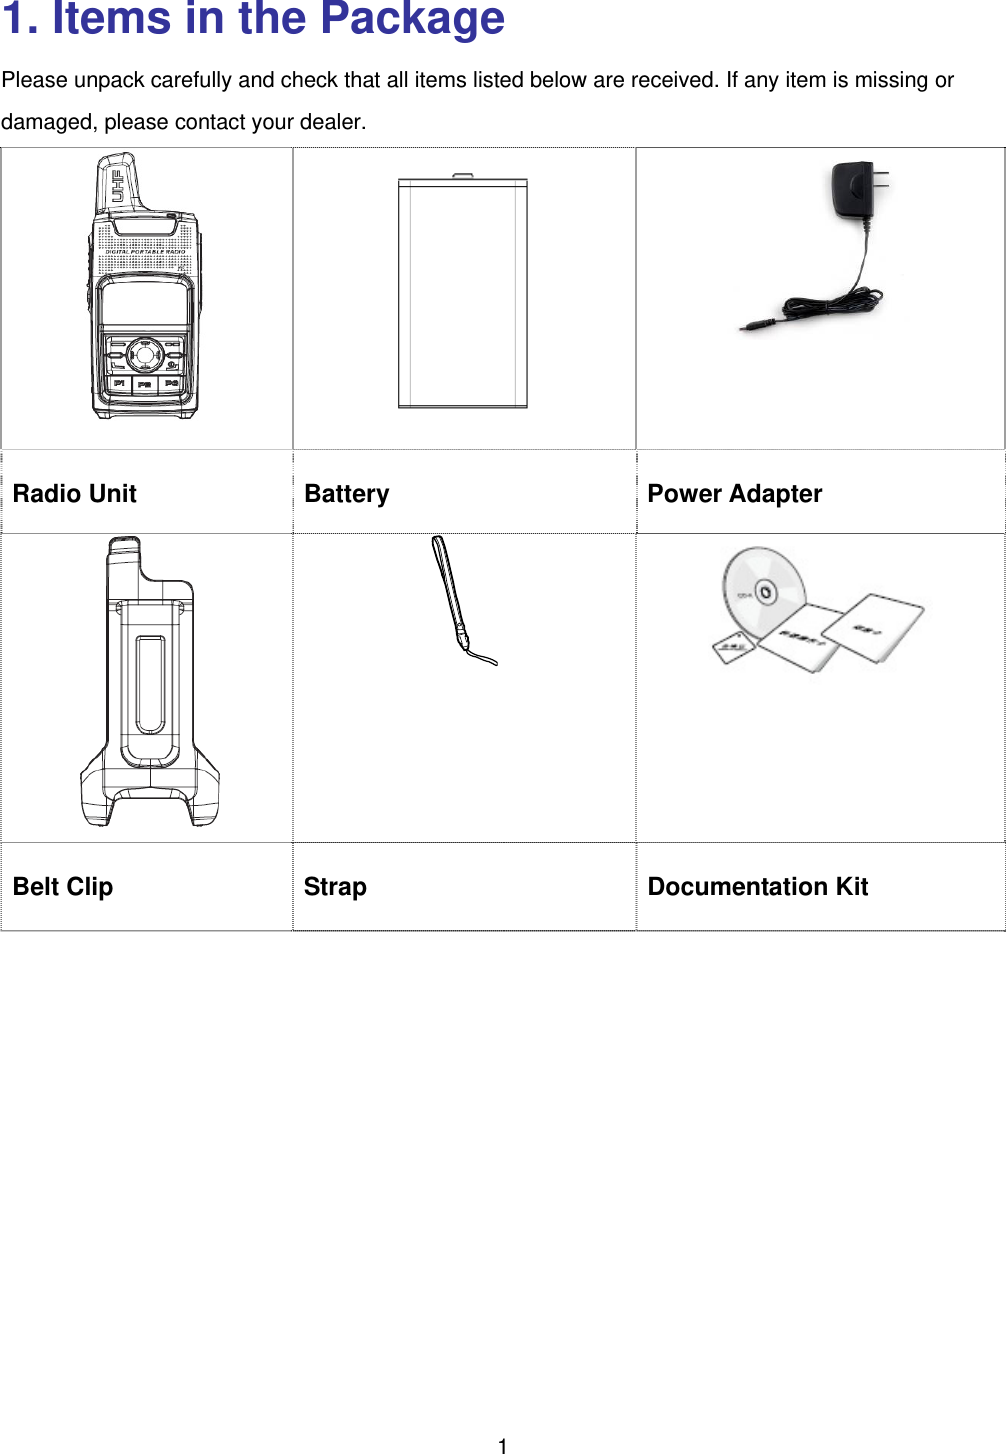  1  1. Items in the Package Please unpack carefully and check that all items listed below are received. If any item is missing or damaged, please contact your dealer.      Radio Unit  Battery  Power Adapter    Belt Clip  Strap  Documentation Kit  